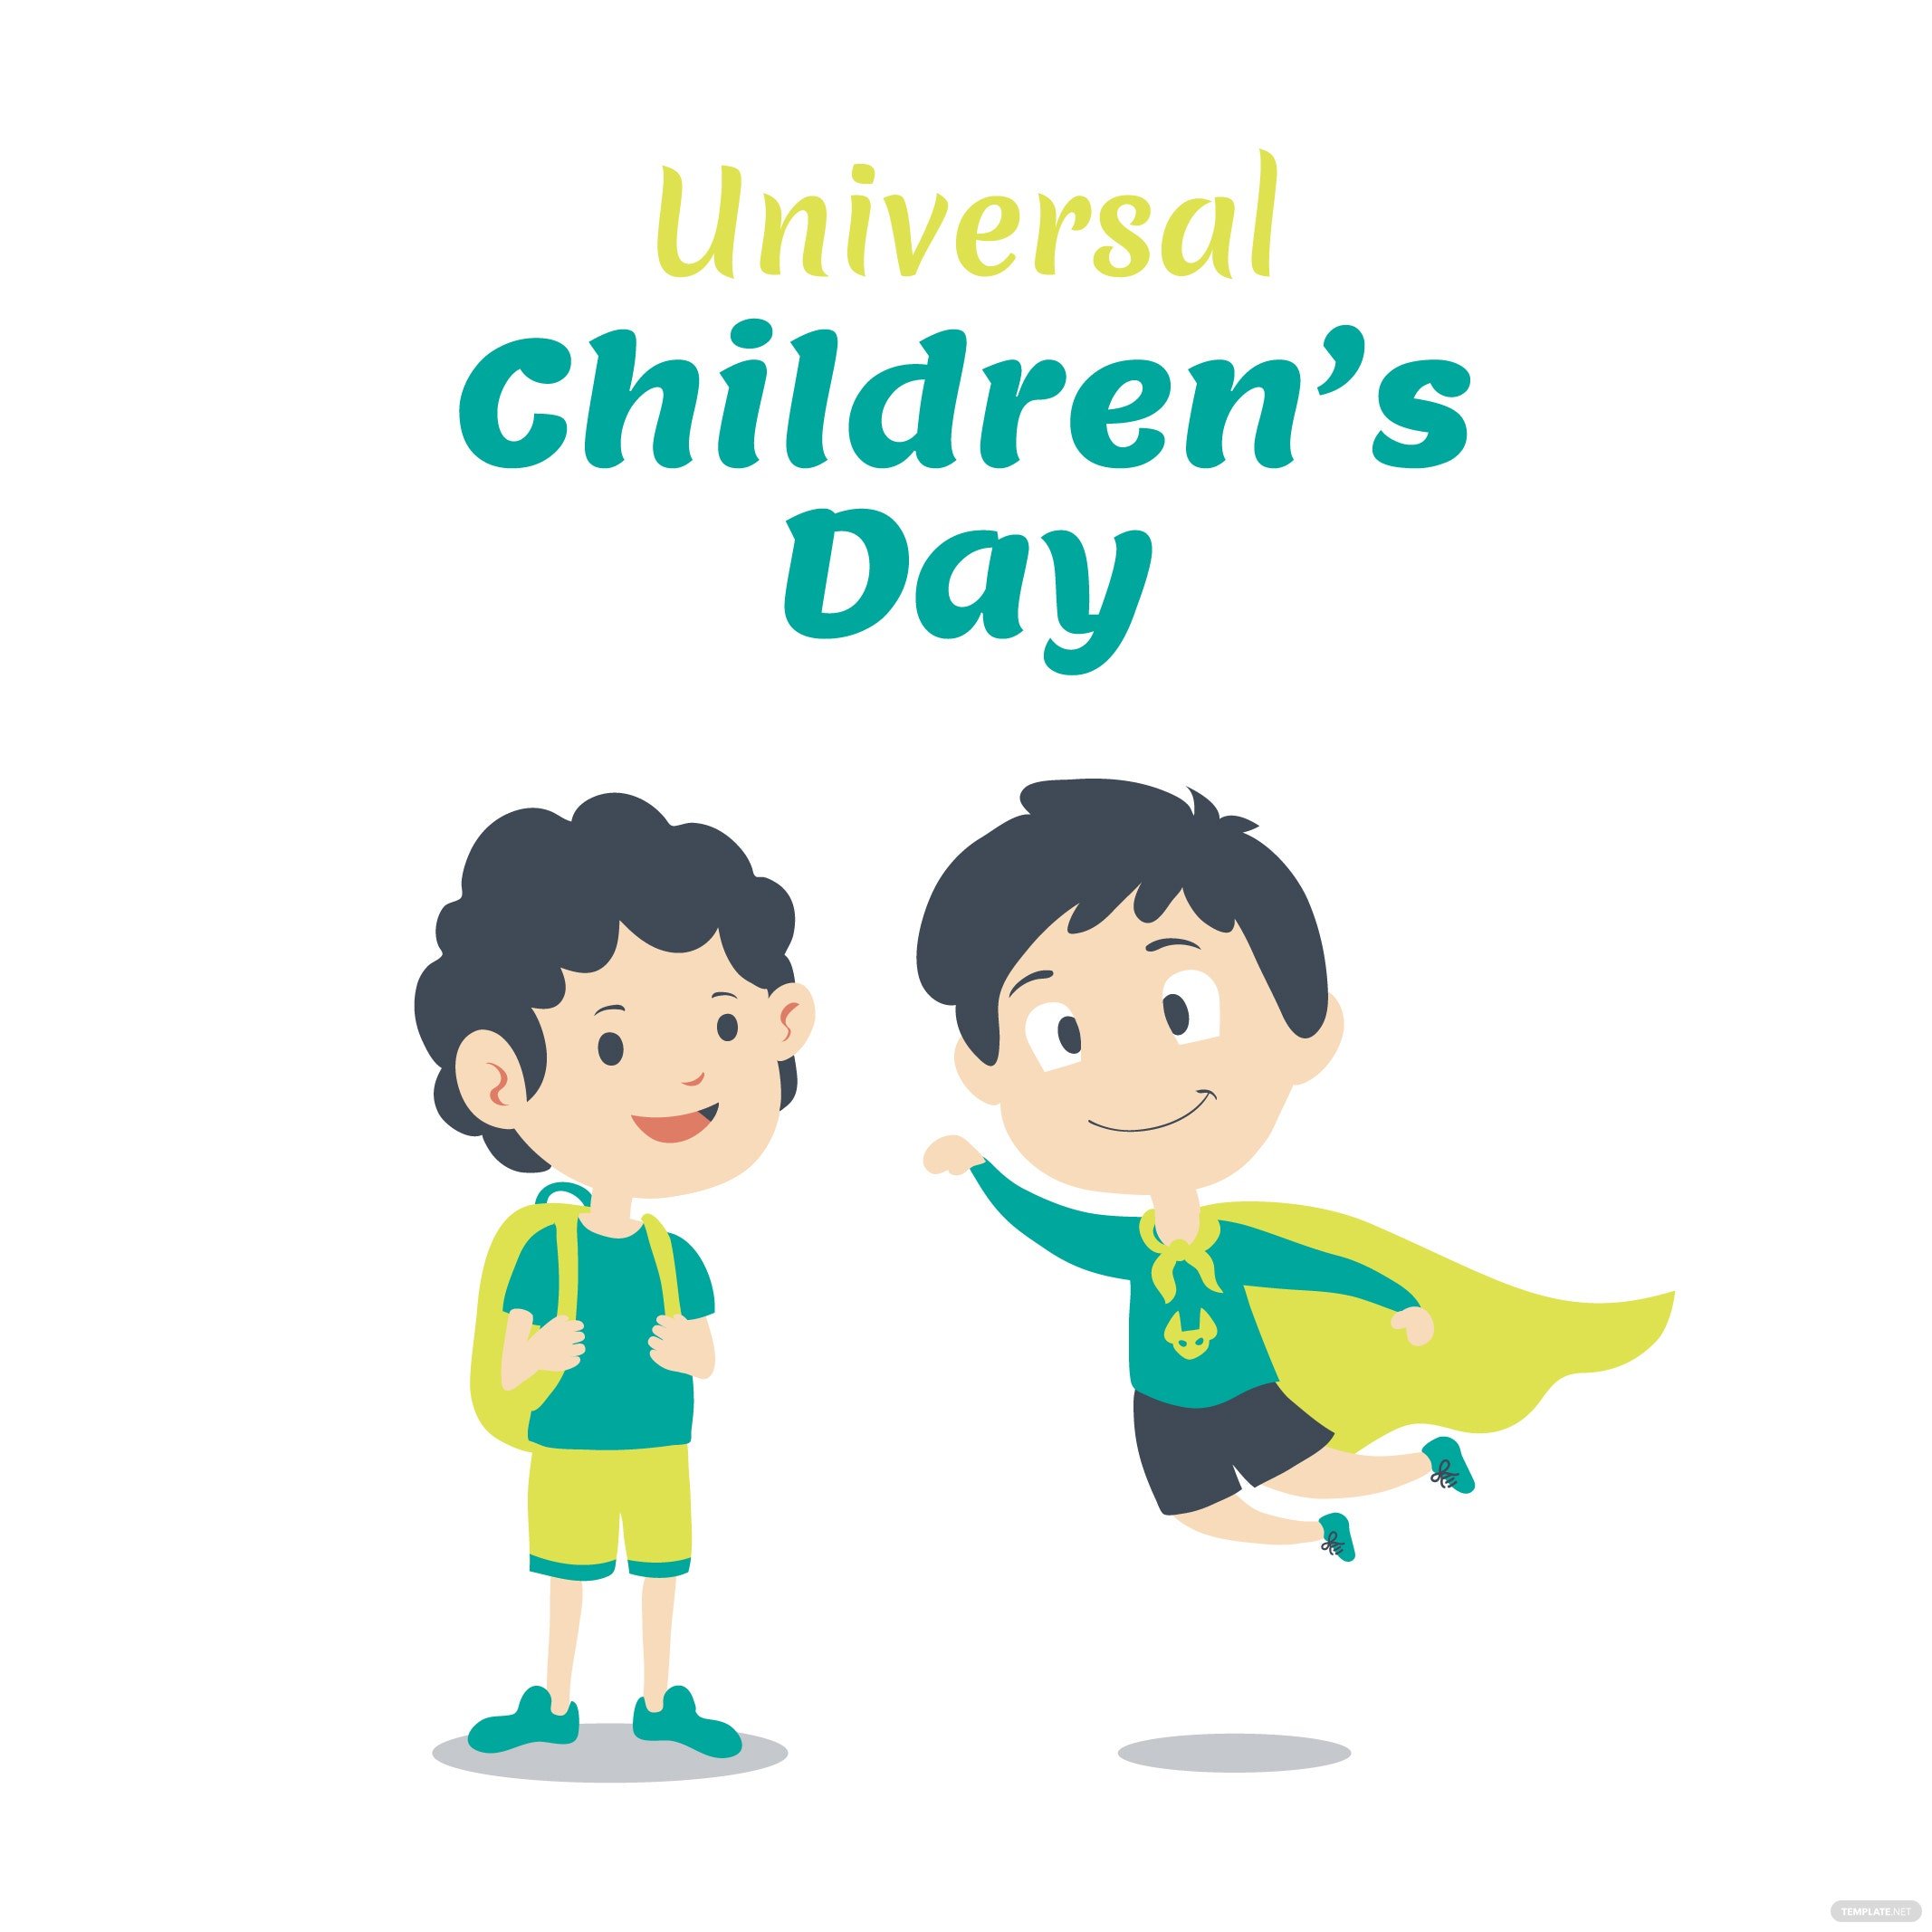 universal children’s day celebration vector ideas and examples